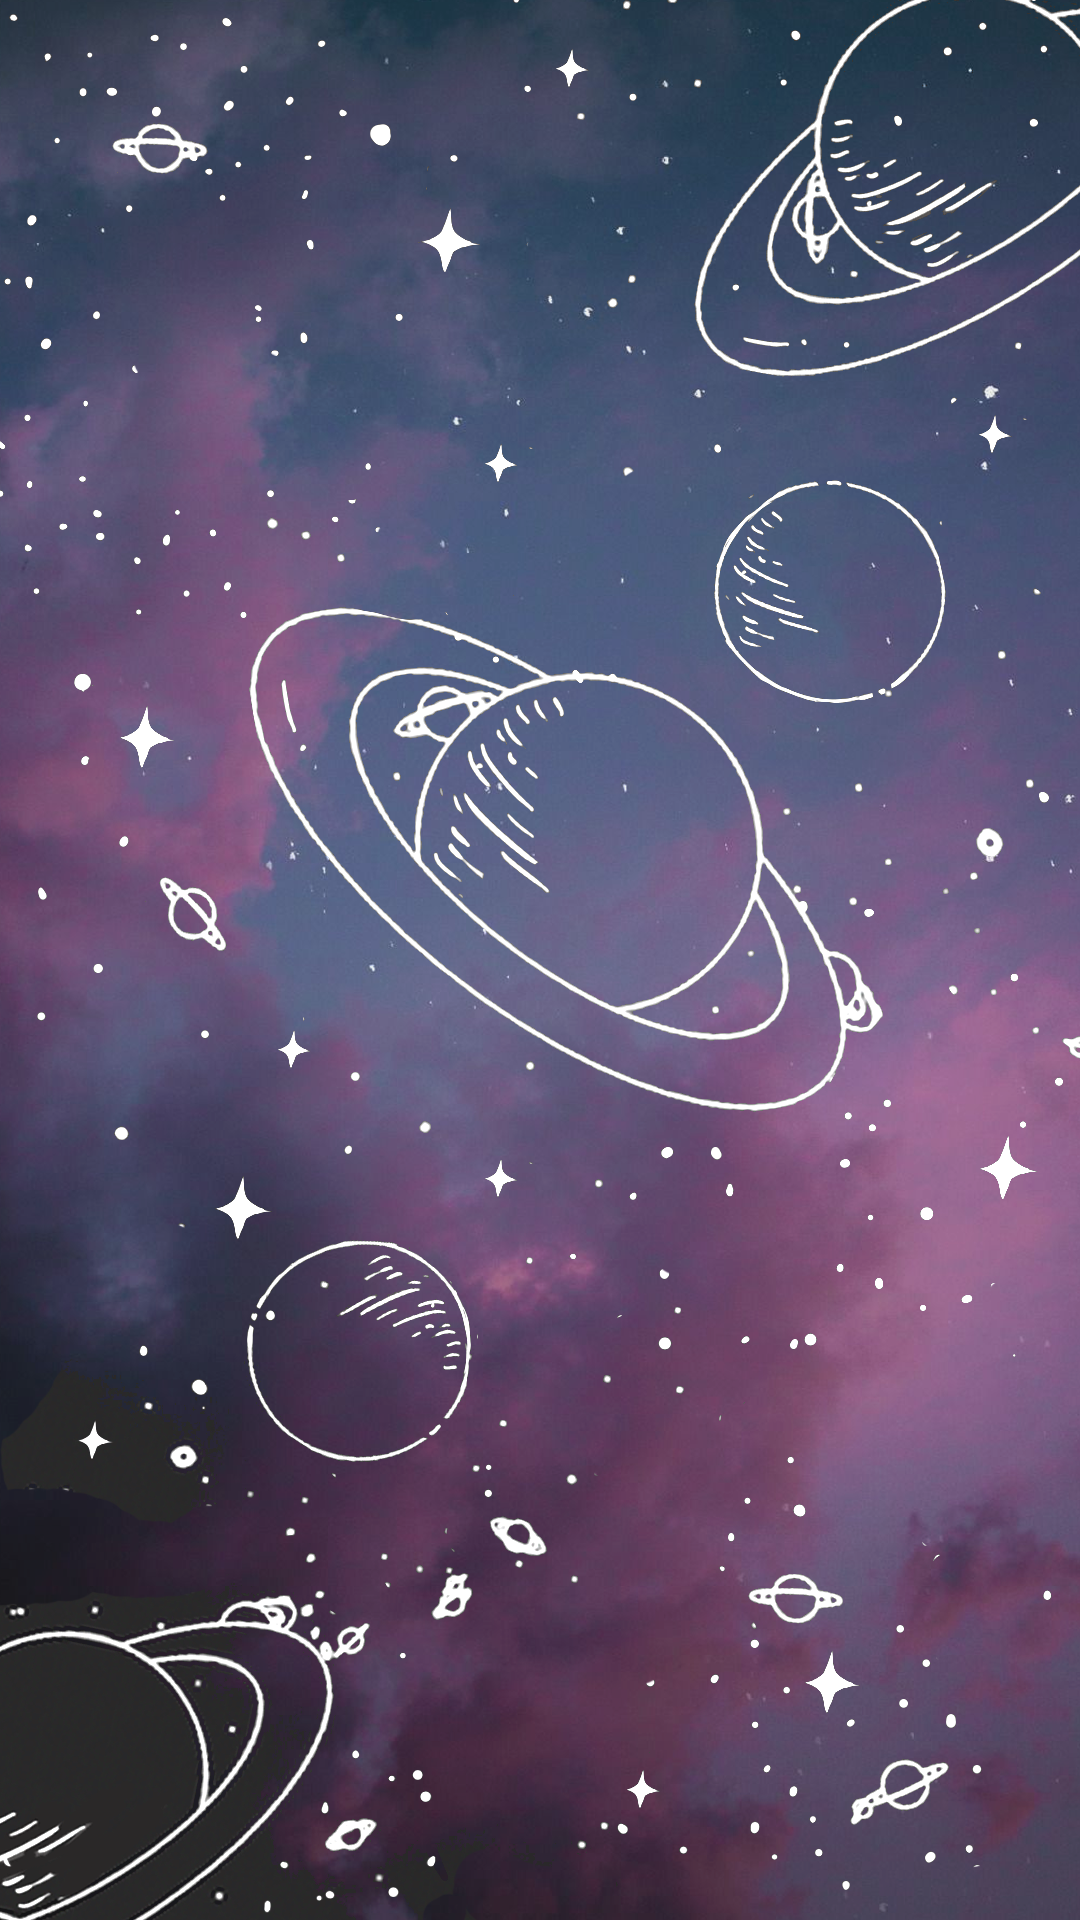 universe, galaxy, stars, planets, space, pastel colors, wallpaper